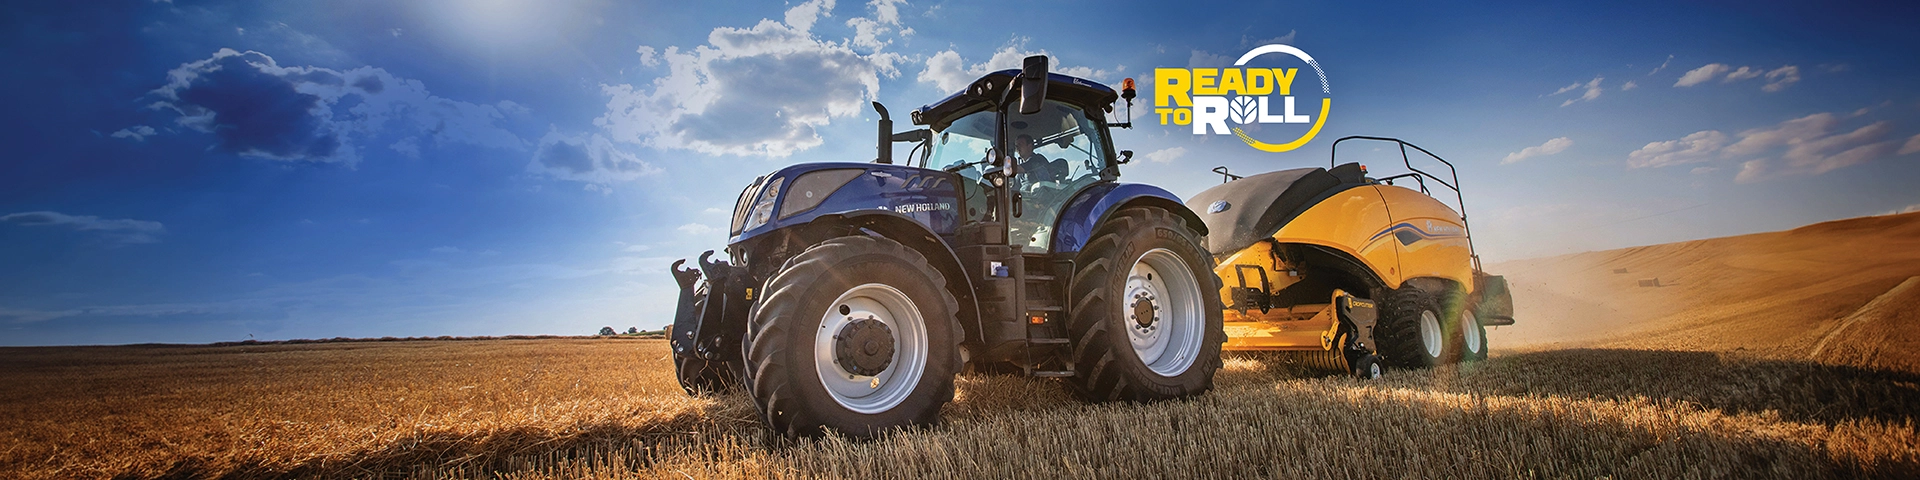 Ready to Roll - Offers and Promotions on New Holland Equipment